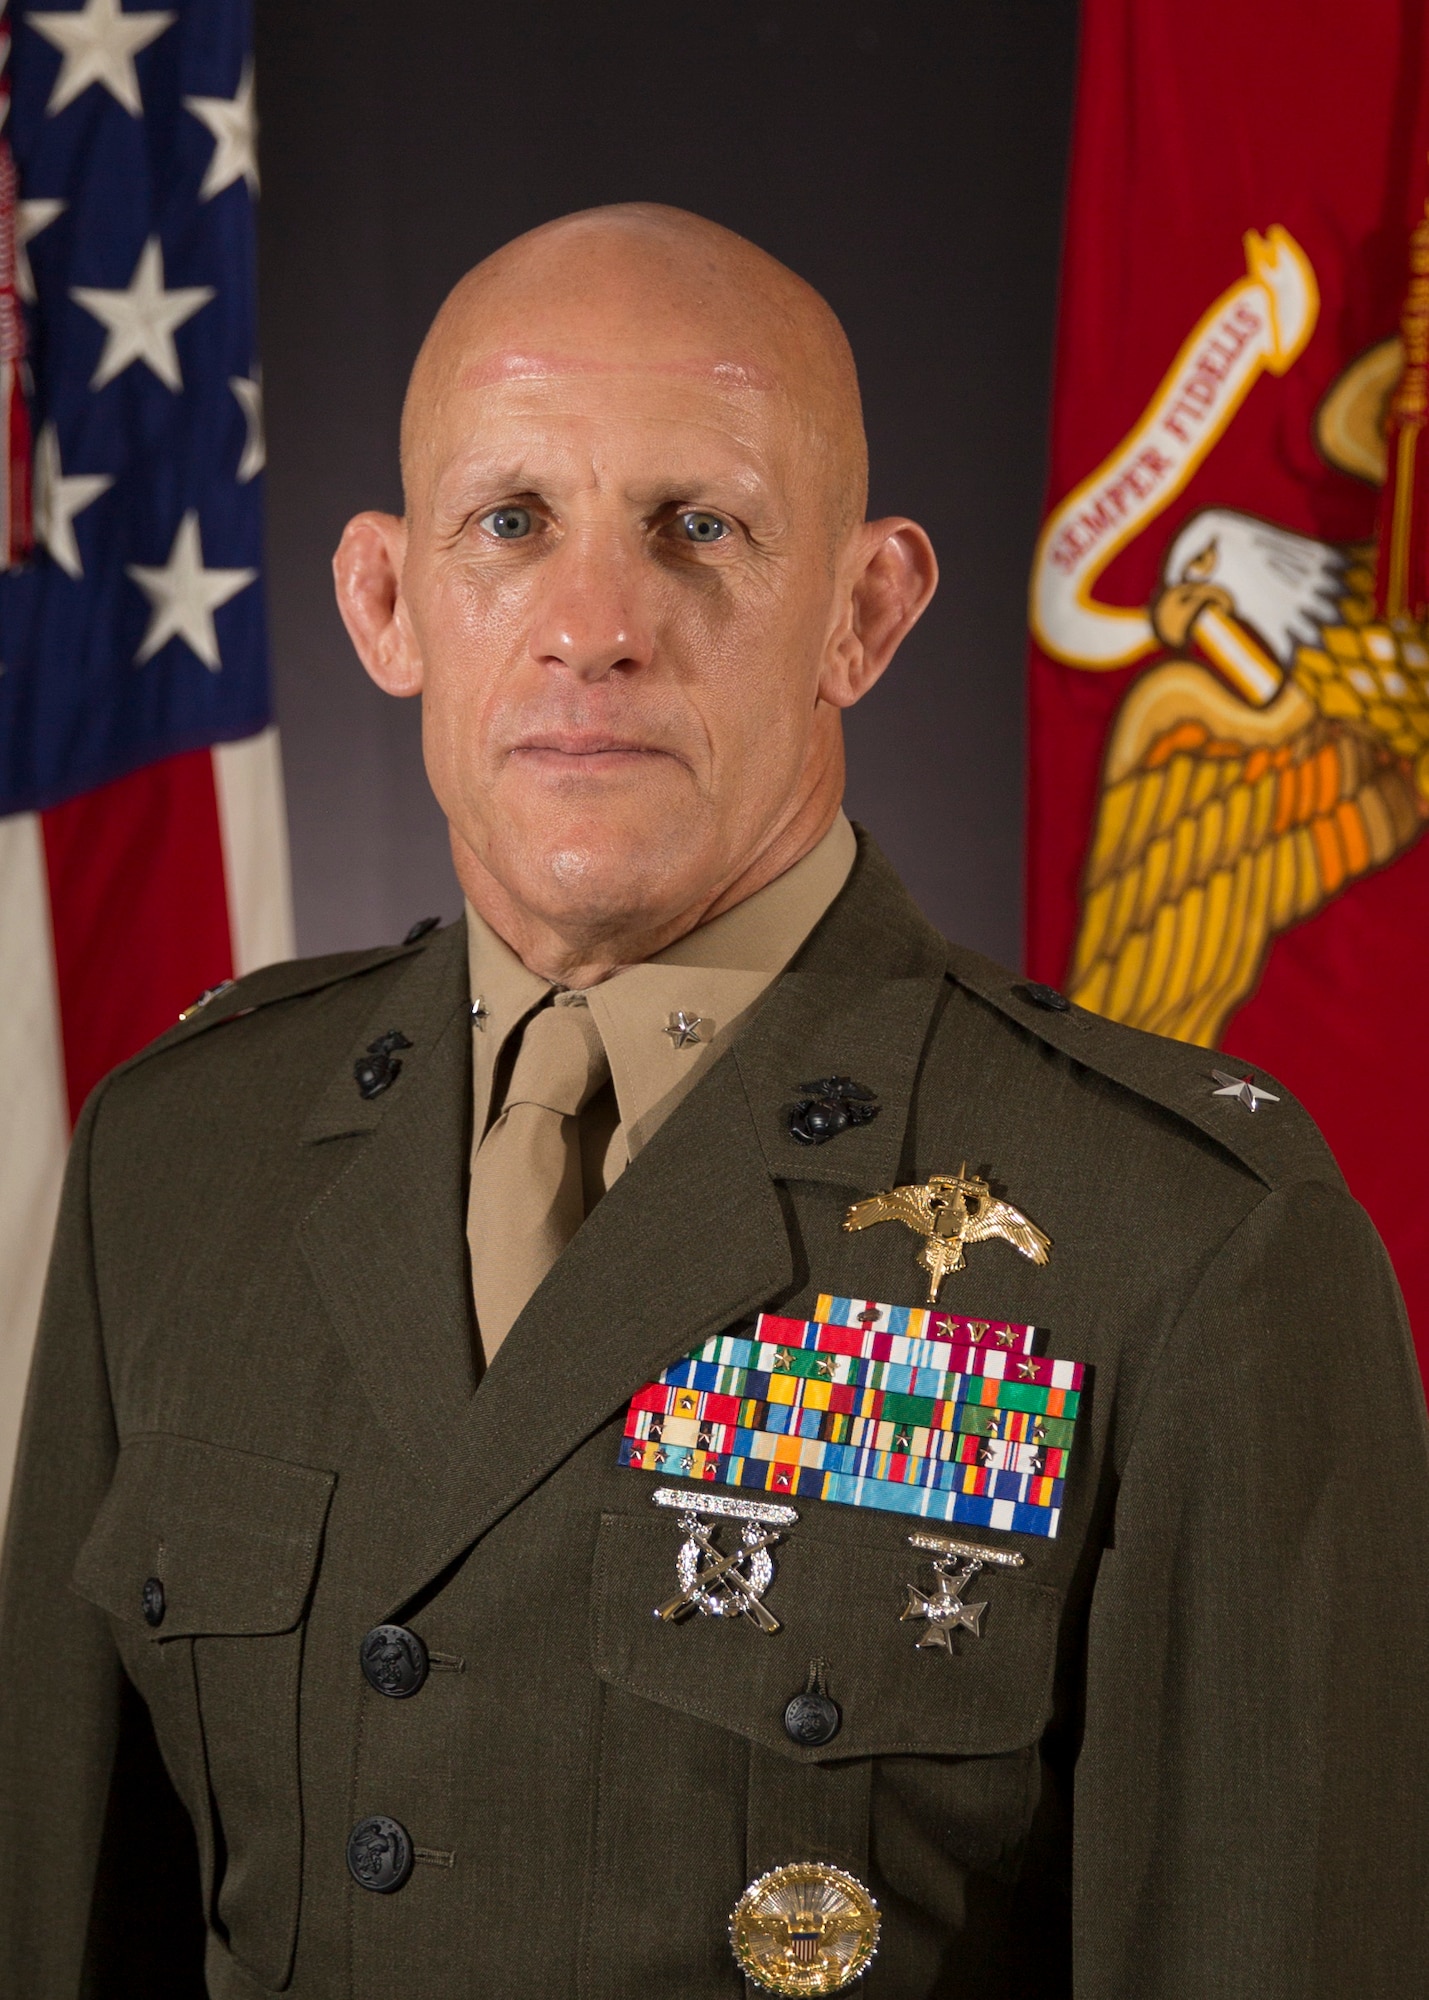 Marine Brig. Gen. Peter Huntley assumed command of Special Operations Command South during a change of command ceremony at Homestead Air Reserve Base, Fla., on July 6. (U.S. Marine photo)